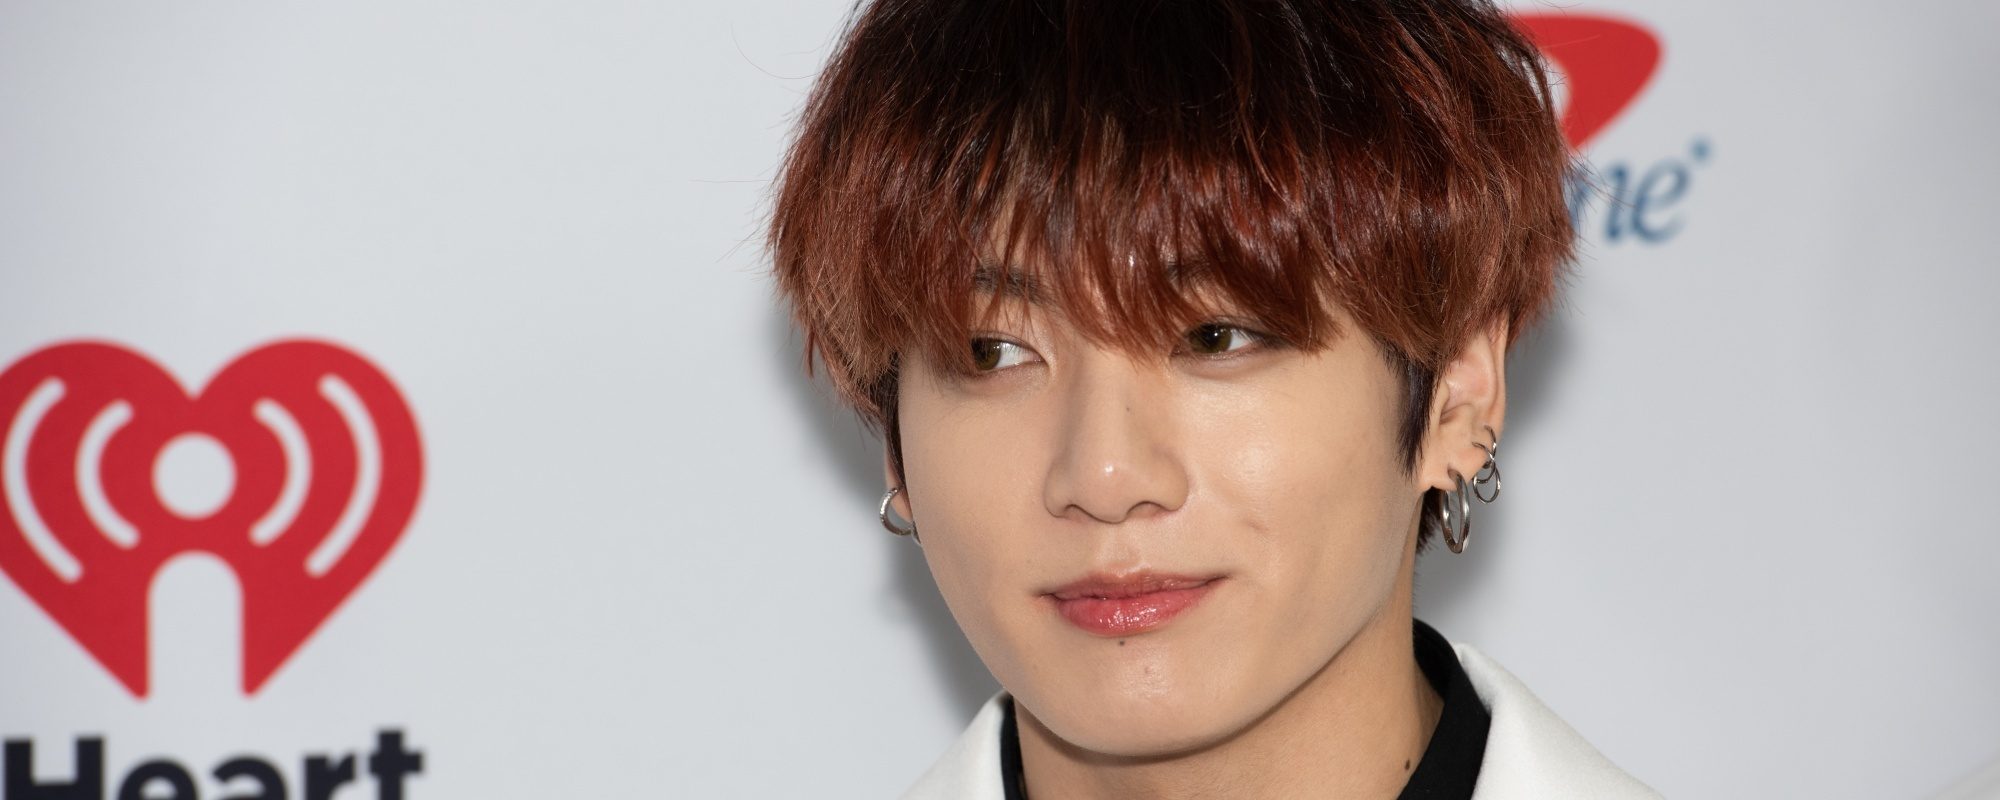 BTS Jungkook inspires Chipotle to change its name on social media